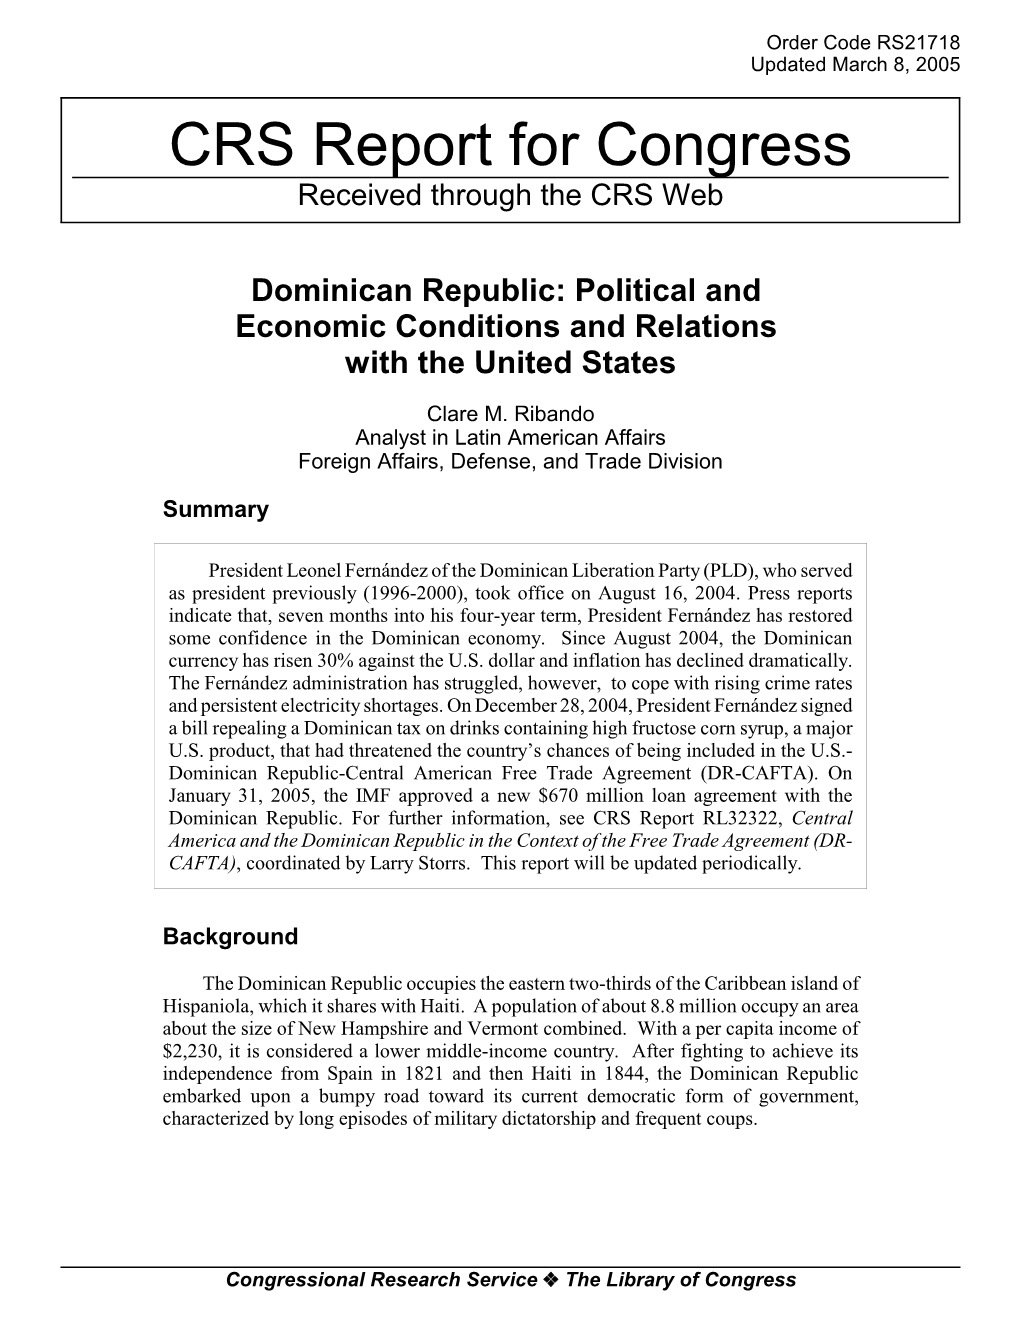 Dominican Republic: Political and Economic Conditions and Relations with the United States